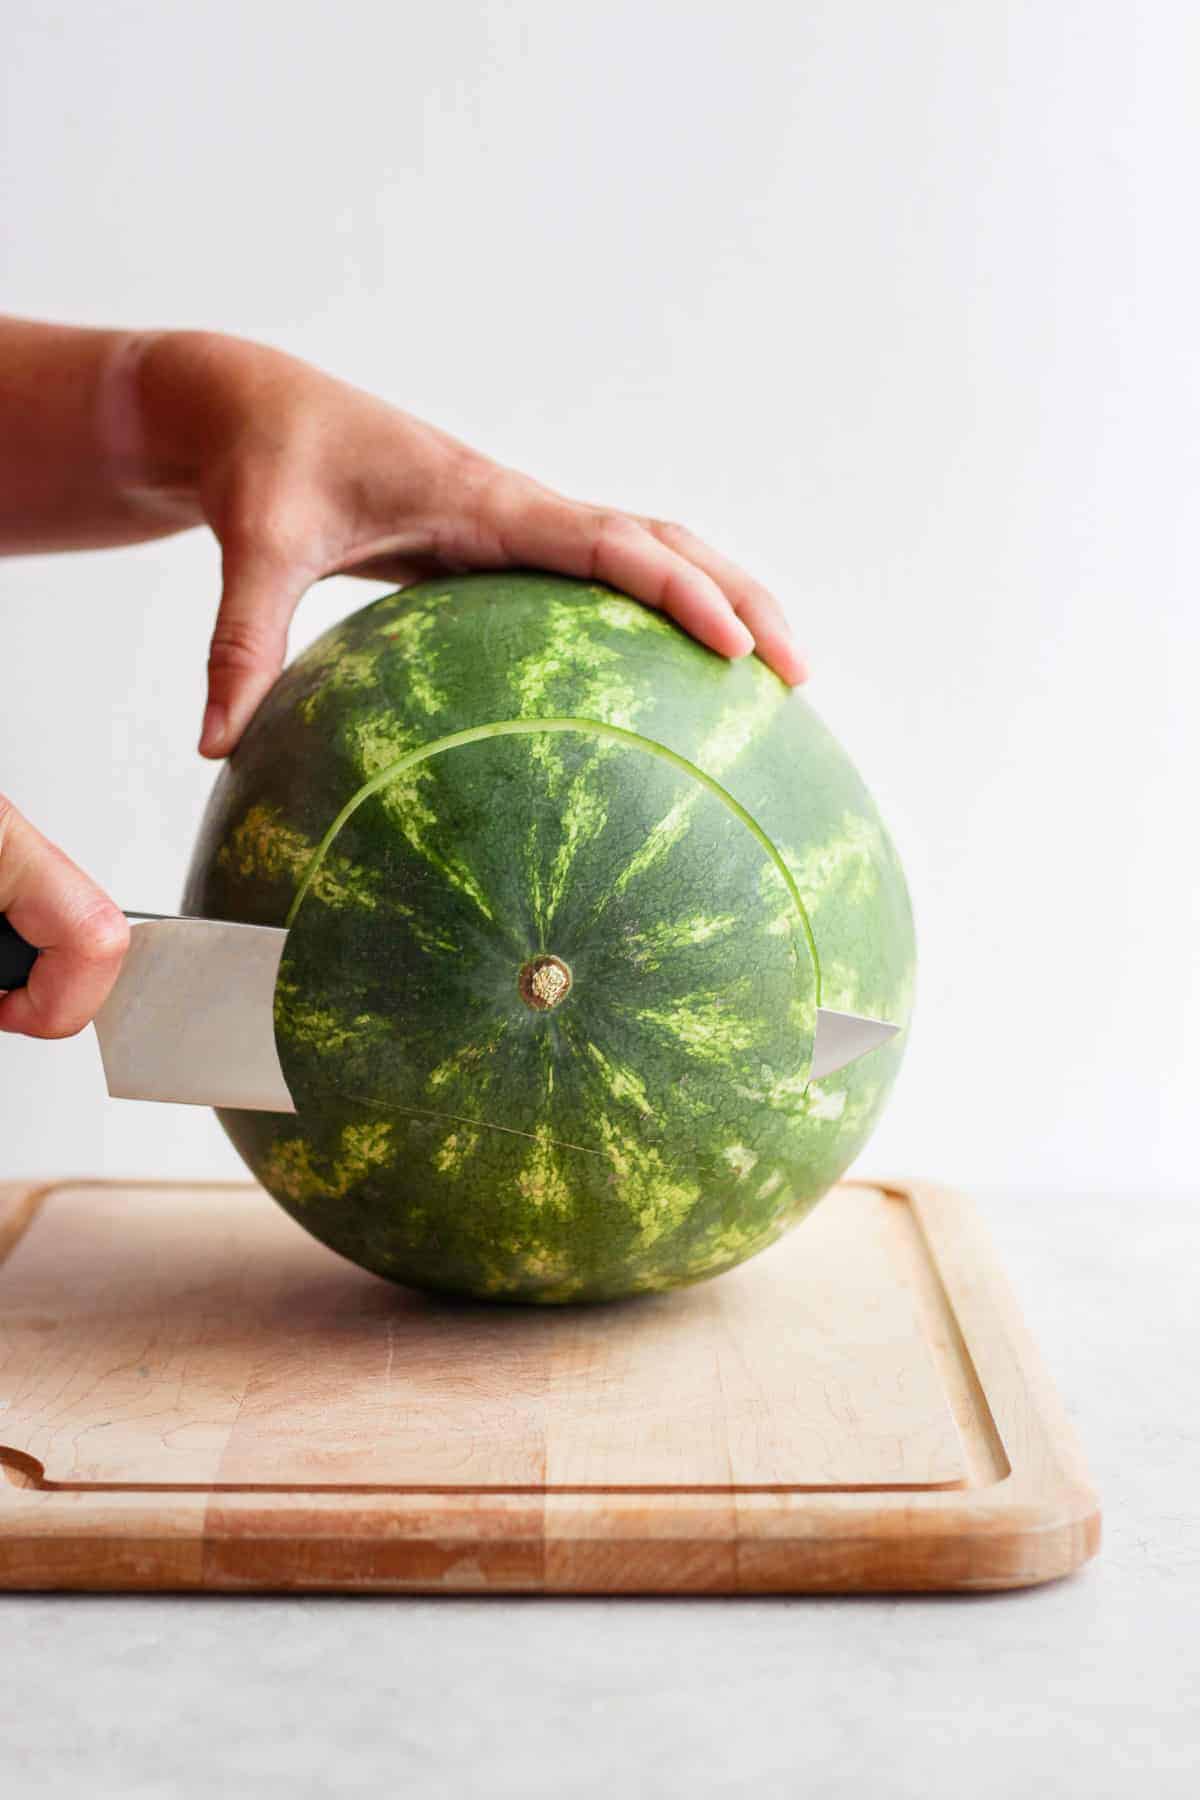 https://feelgoodfoodie.net/wp-content/uploads/2020/08/how-to-cut-watermelon-1.jpg